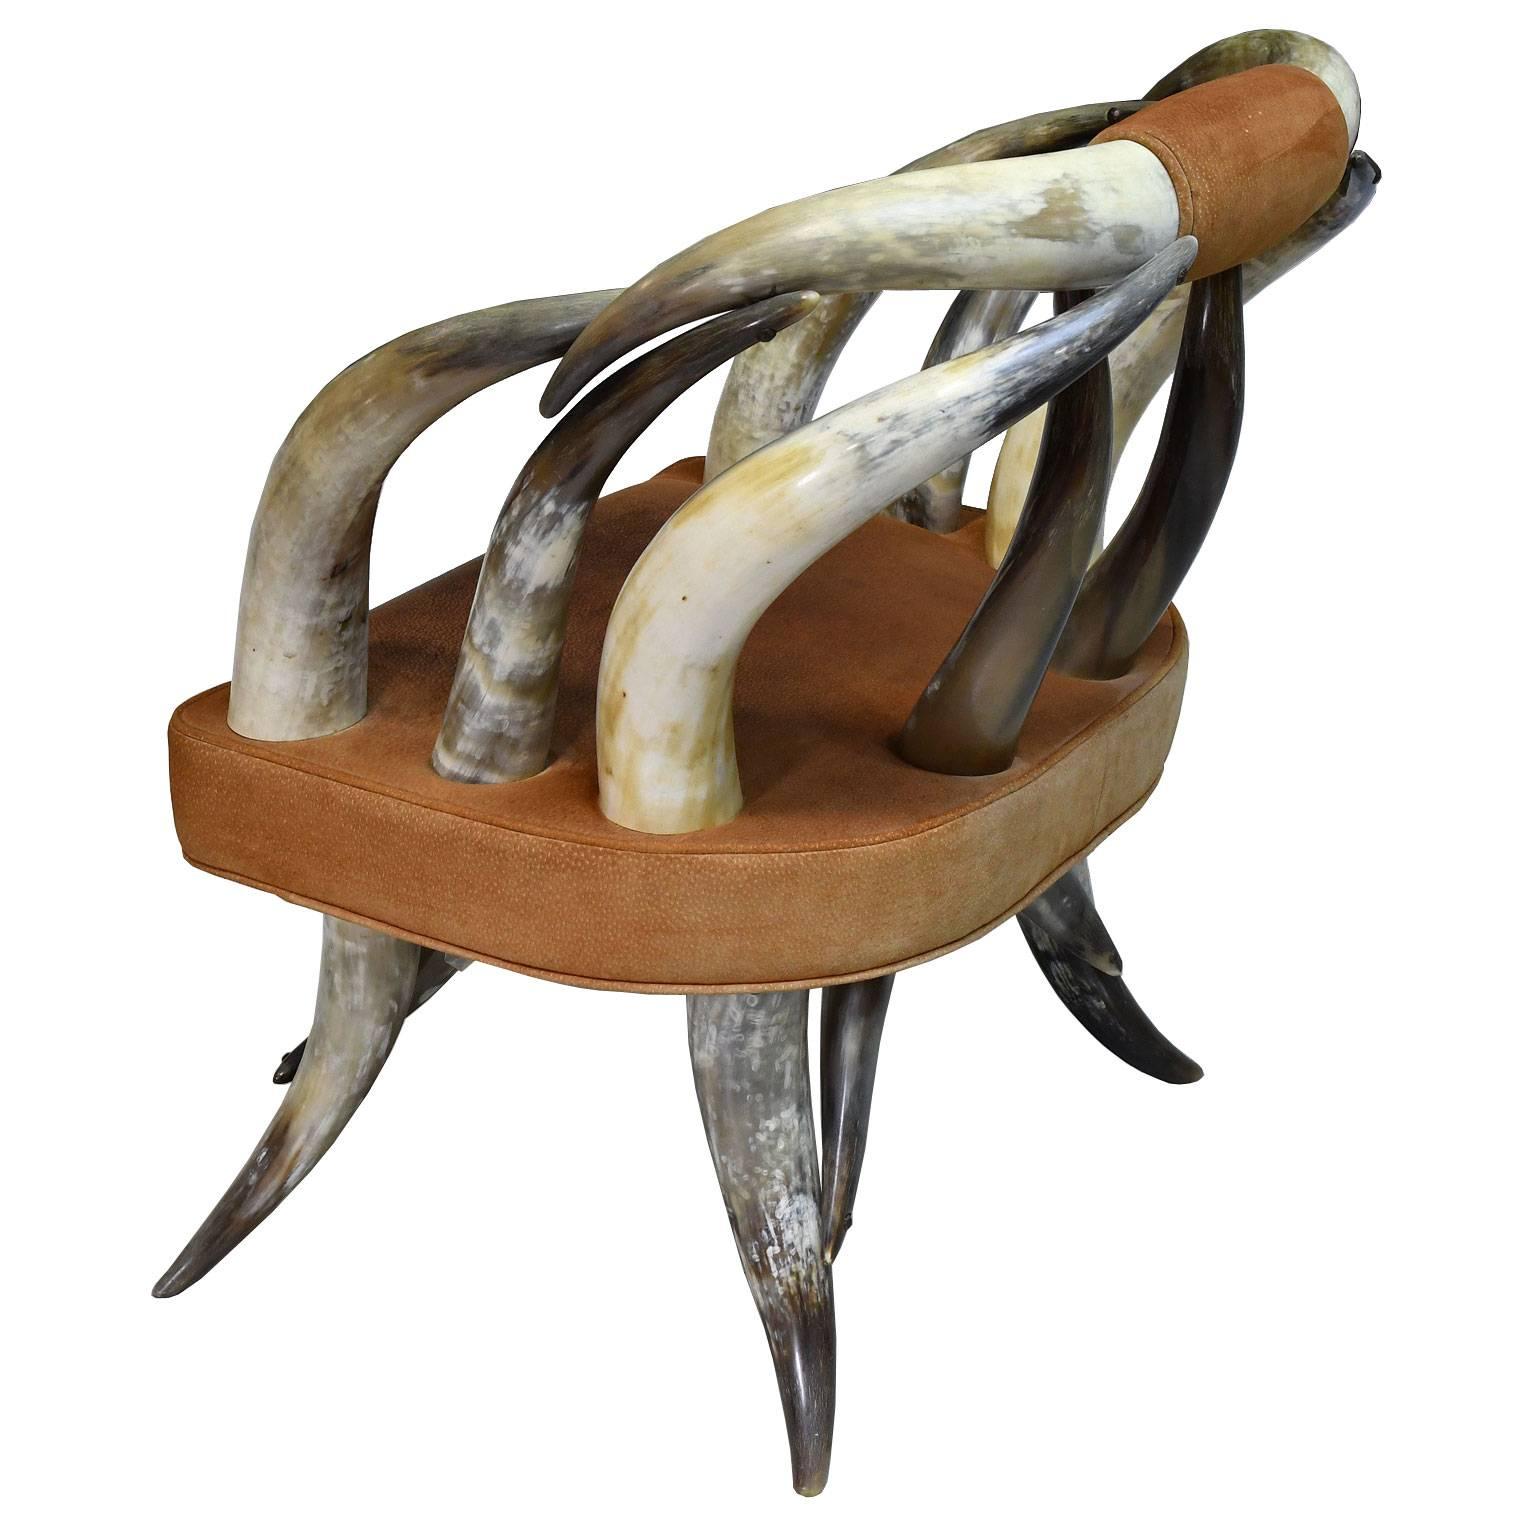 Mid-20th Century Vintage Rustic American Long-Horn Steer Chair with Leather Seat, circa 1960s For Sale